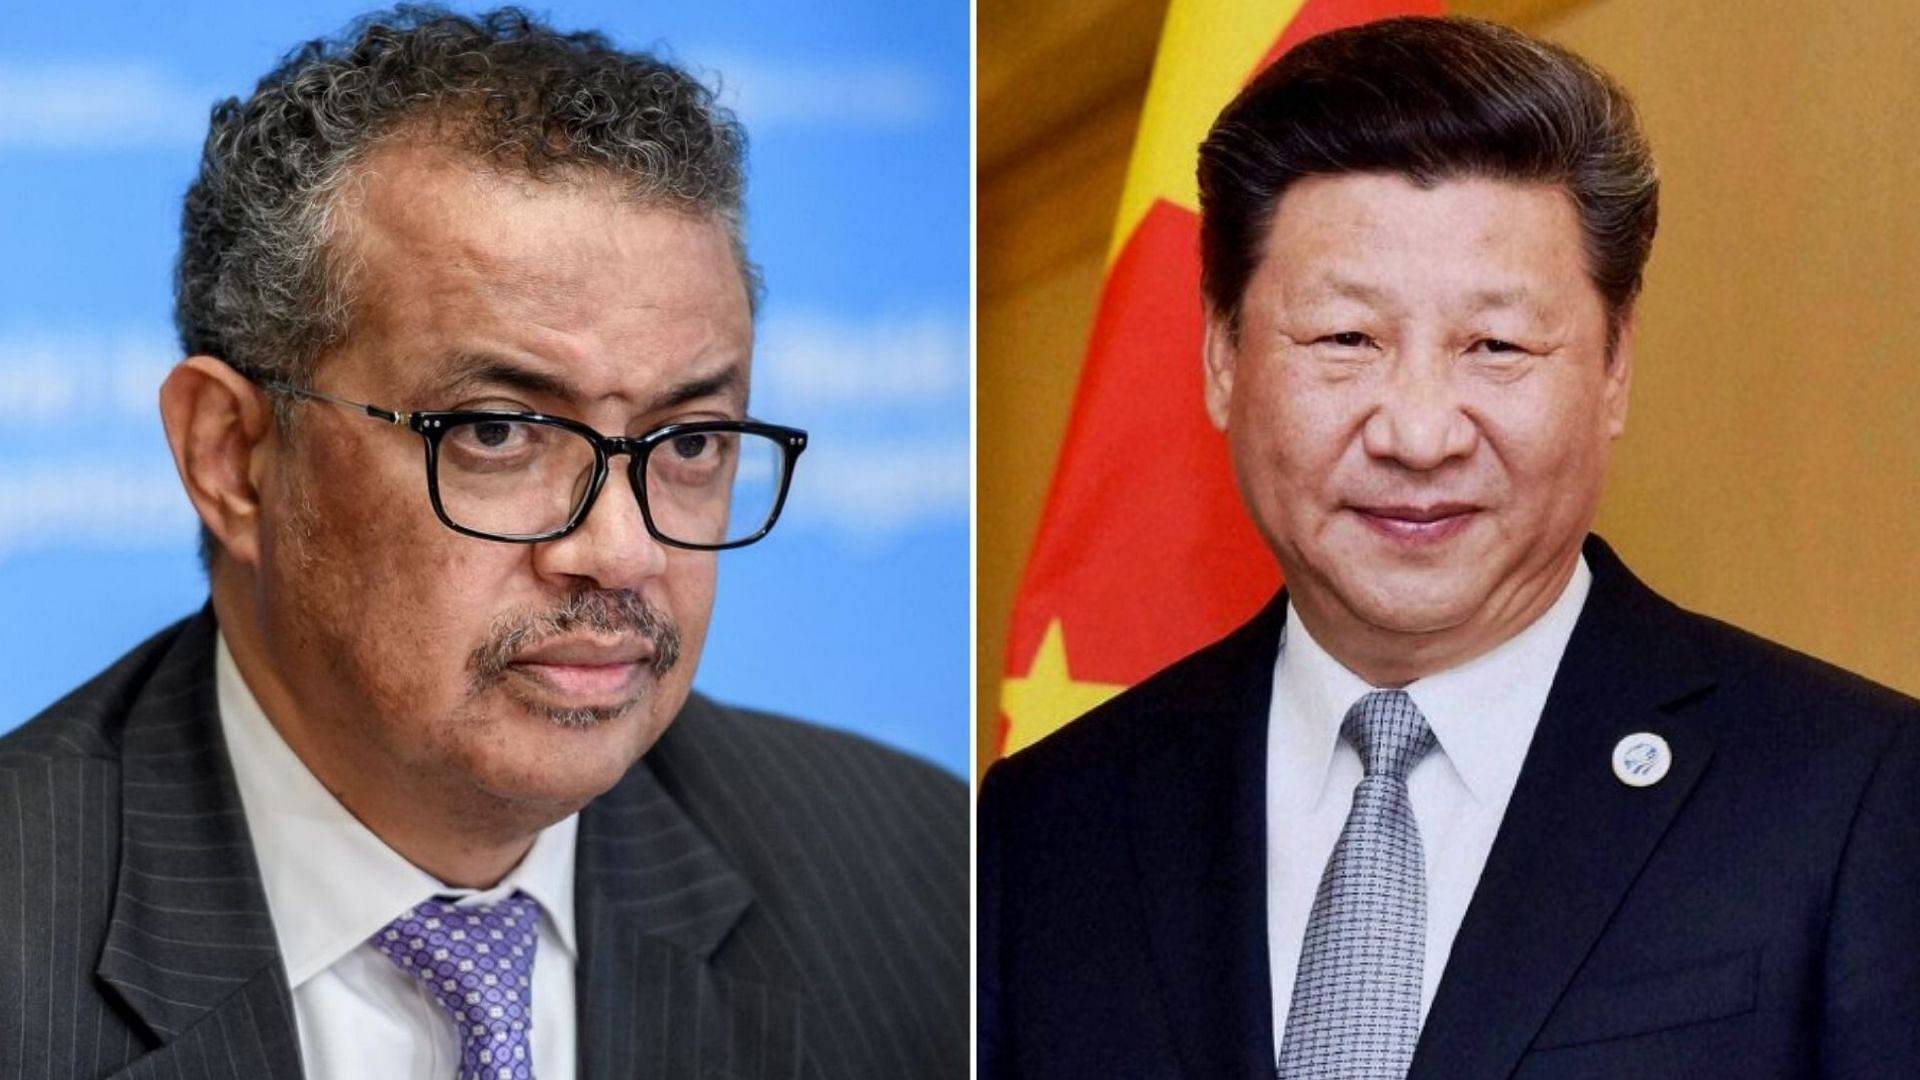 File image of WHO Director-General Tedros Adhanom Ghebreyesus and Chinese President Xi Jinping.